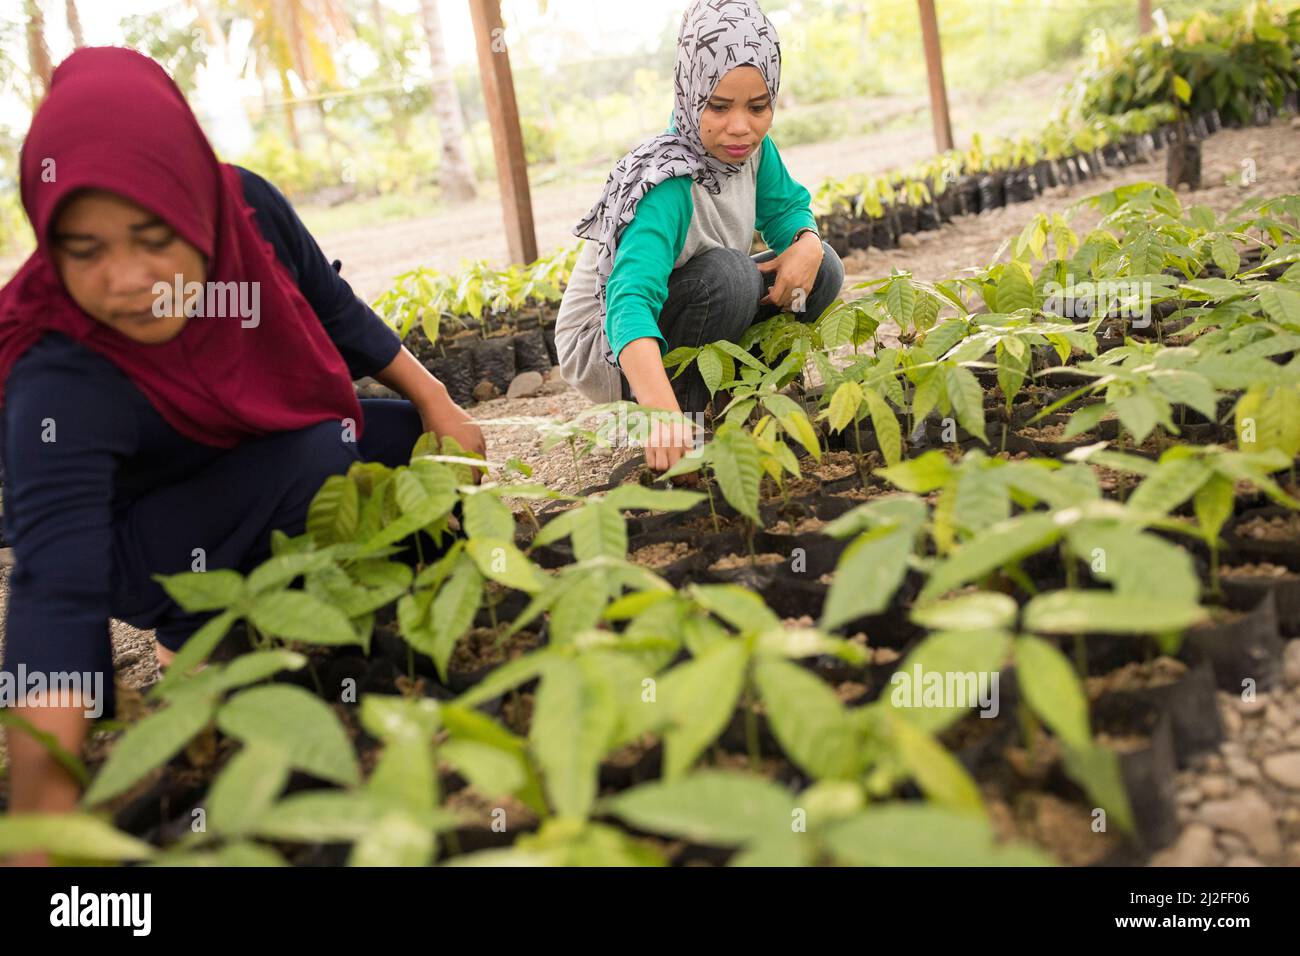 Sharifah (31, r) and Jumria (30, l) work in a cocoa seedling nursery and training center established under the Green Prosperity project of the Indones Stock Photo